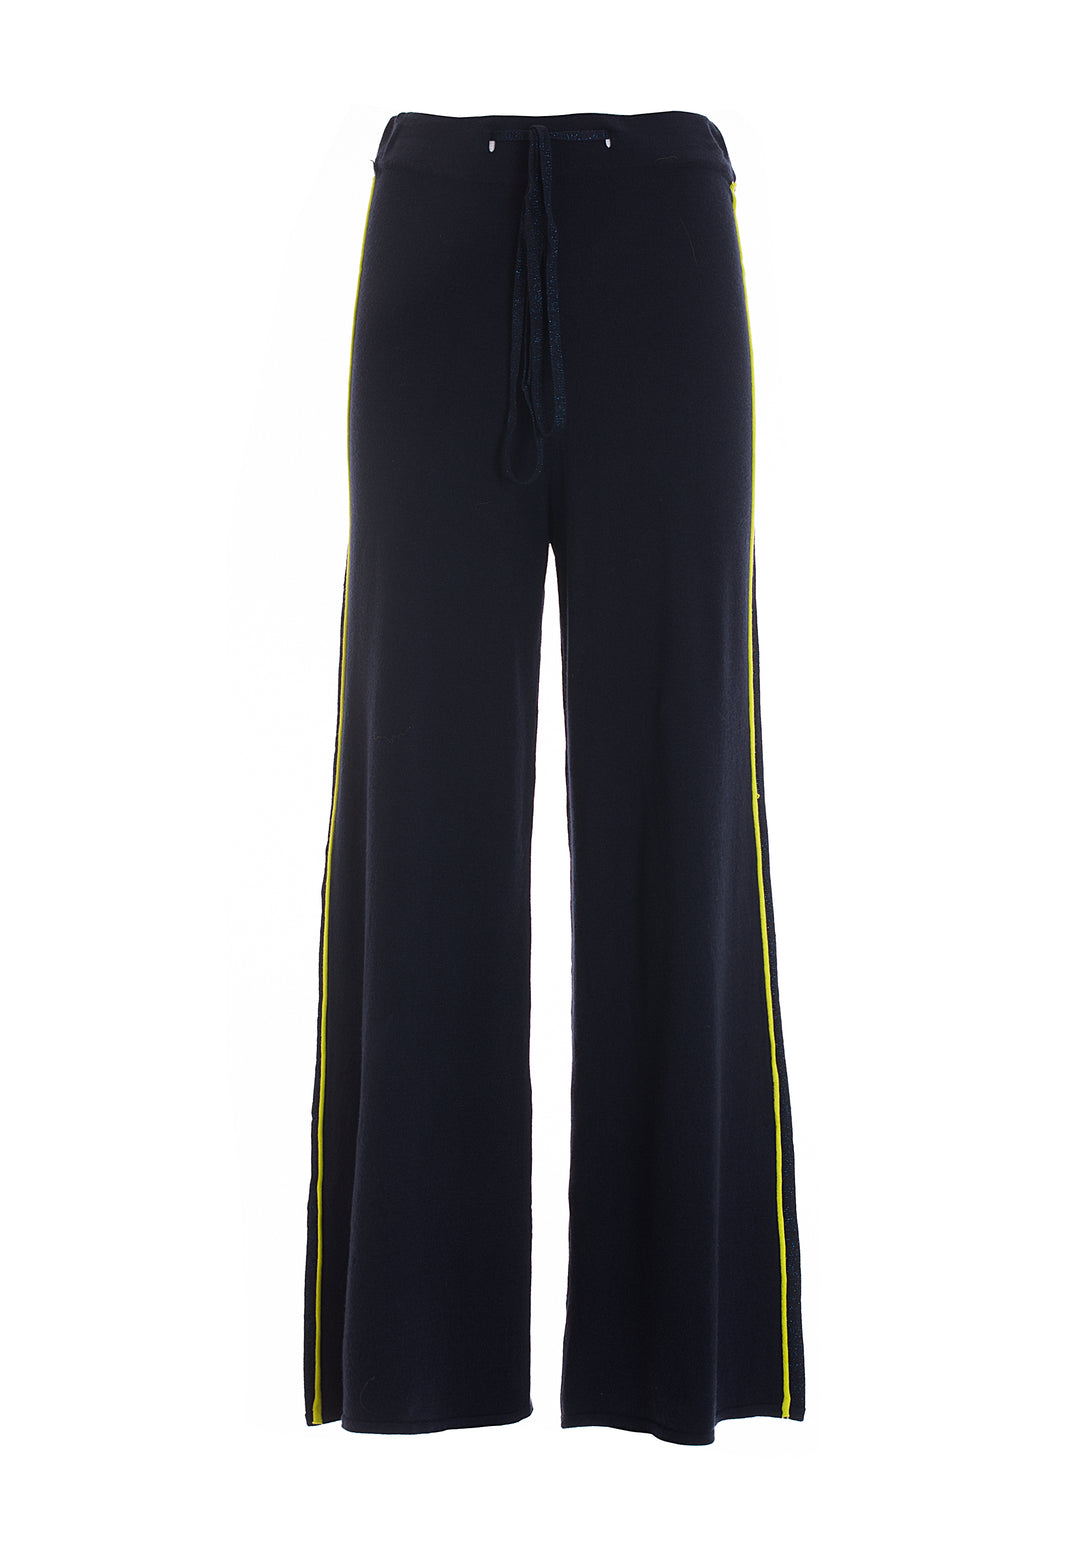 Palazzo pant flare made in fleece